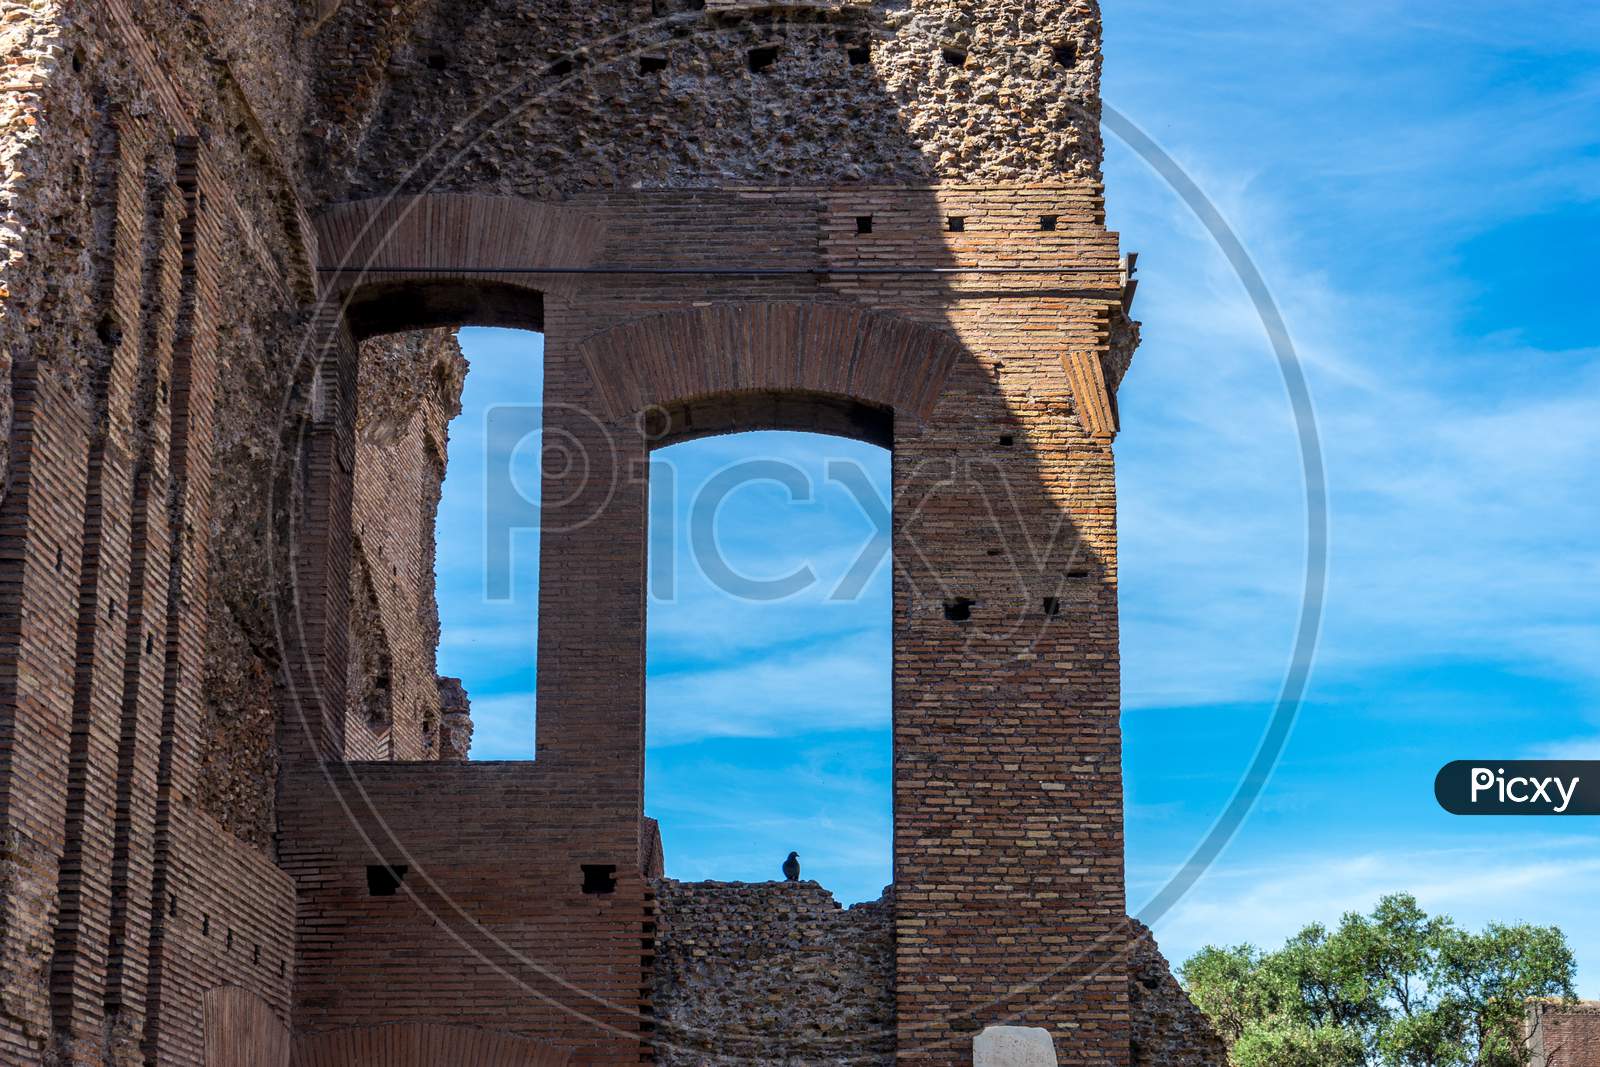 The Ancient Ruins At The Roman Forum, Palatine Hill In Rome